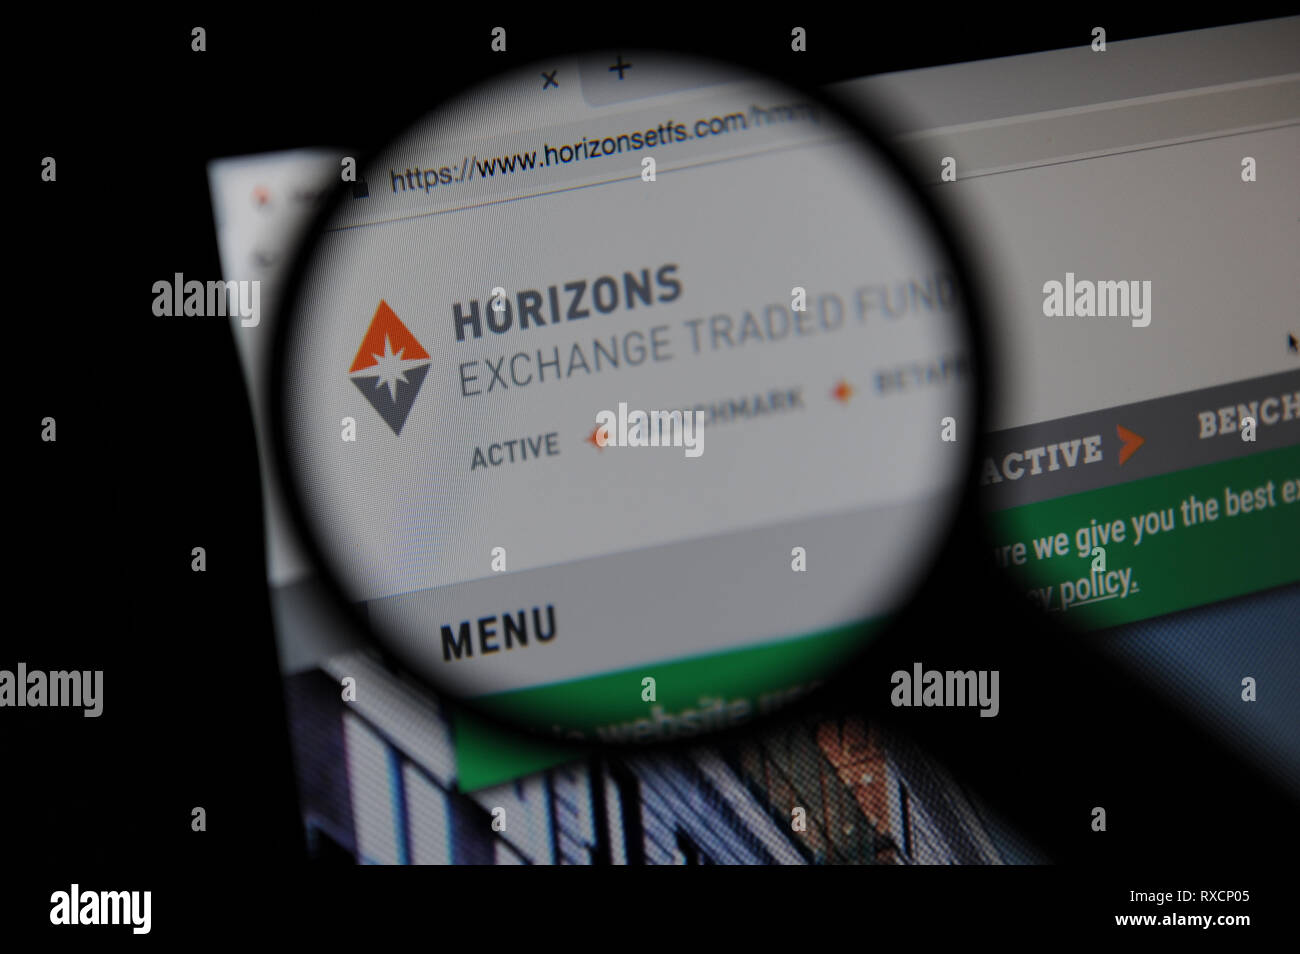 Horizons ETFs,  Horizons Exchange Traded Funds website seen through a magnifying glass Stock Photo